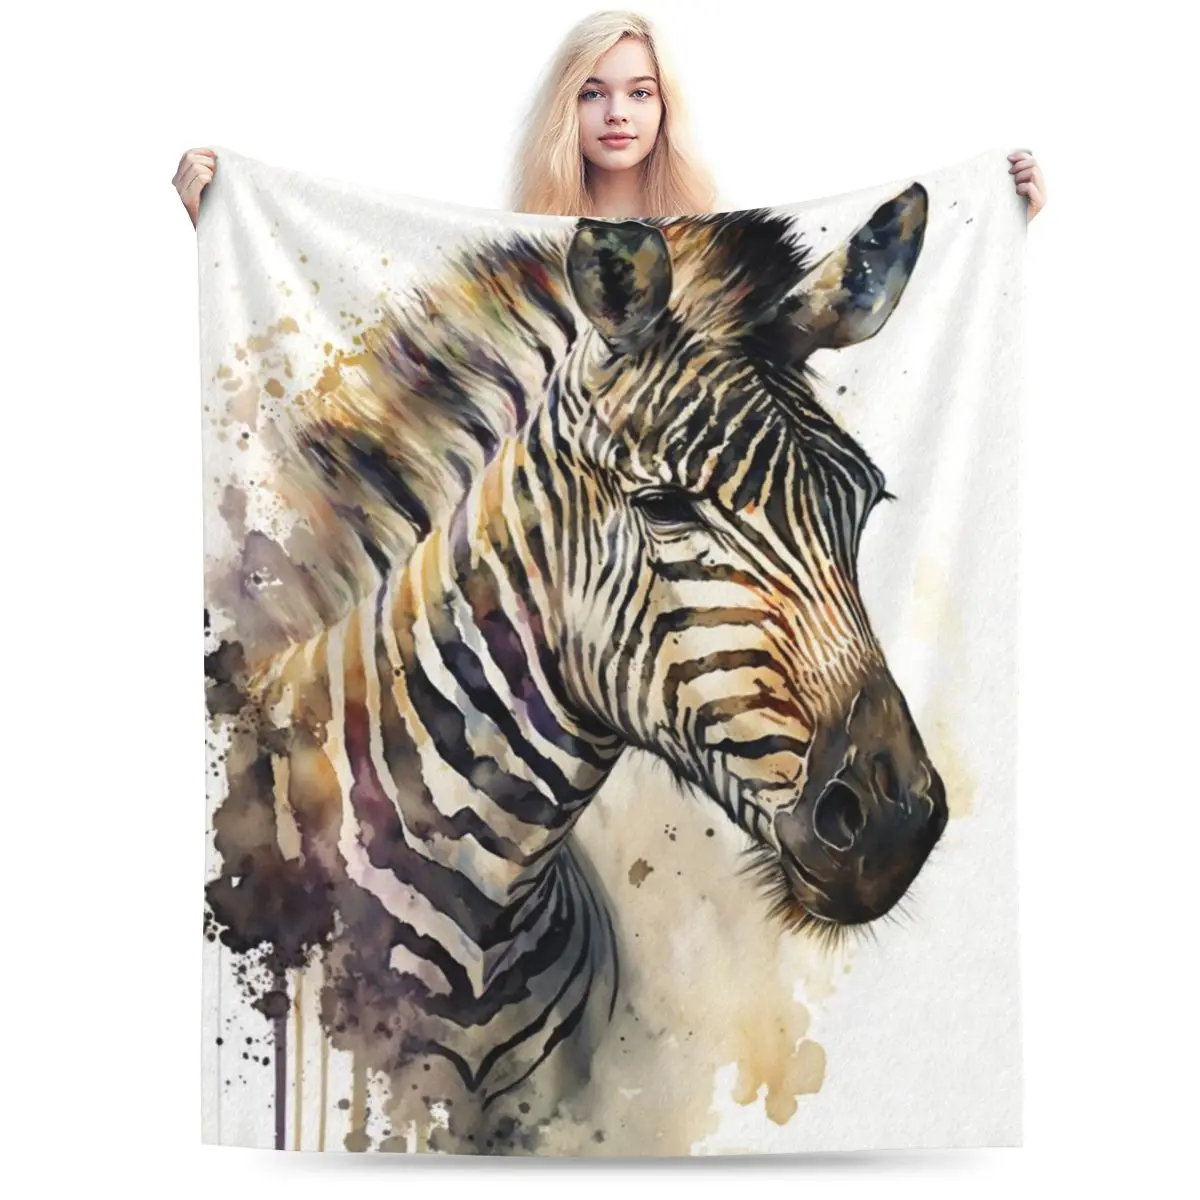 

Watercolor Animal Zebra Cozy Up In Style Anywhere With Our Windproof Anti-Pilling Skin-Friendly And Portable Travel Blanket